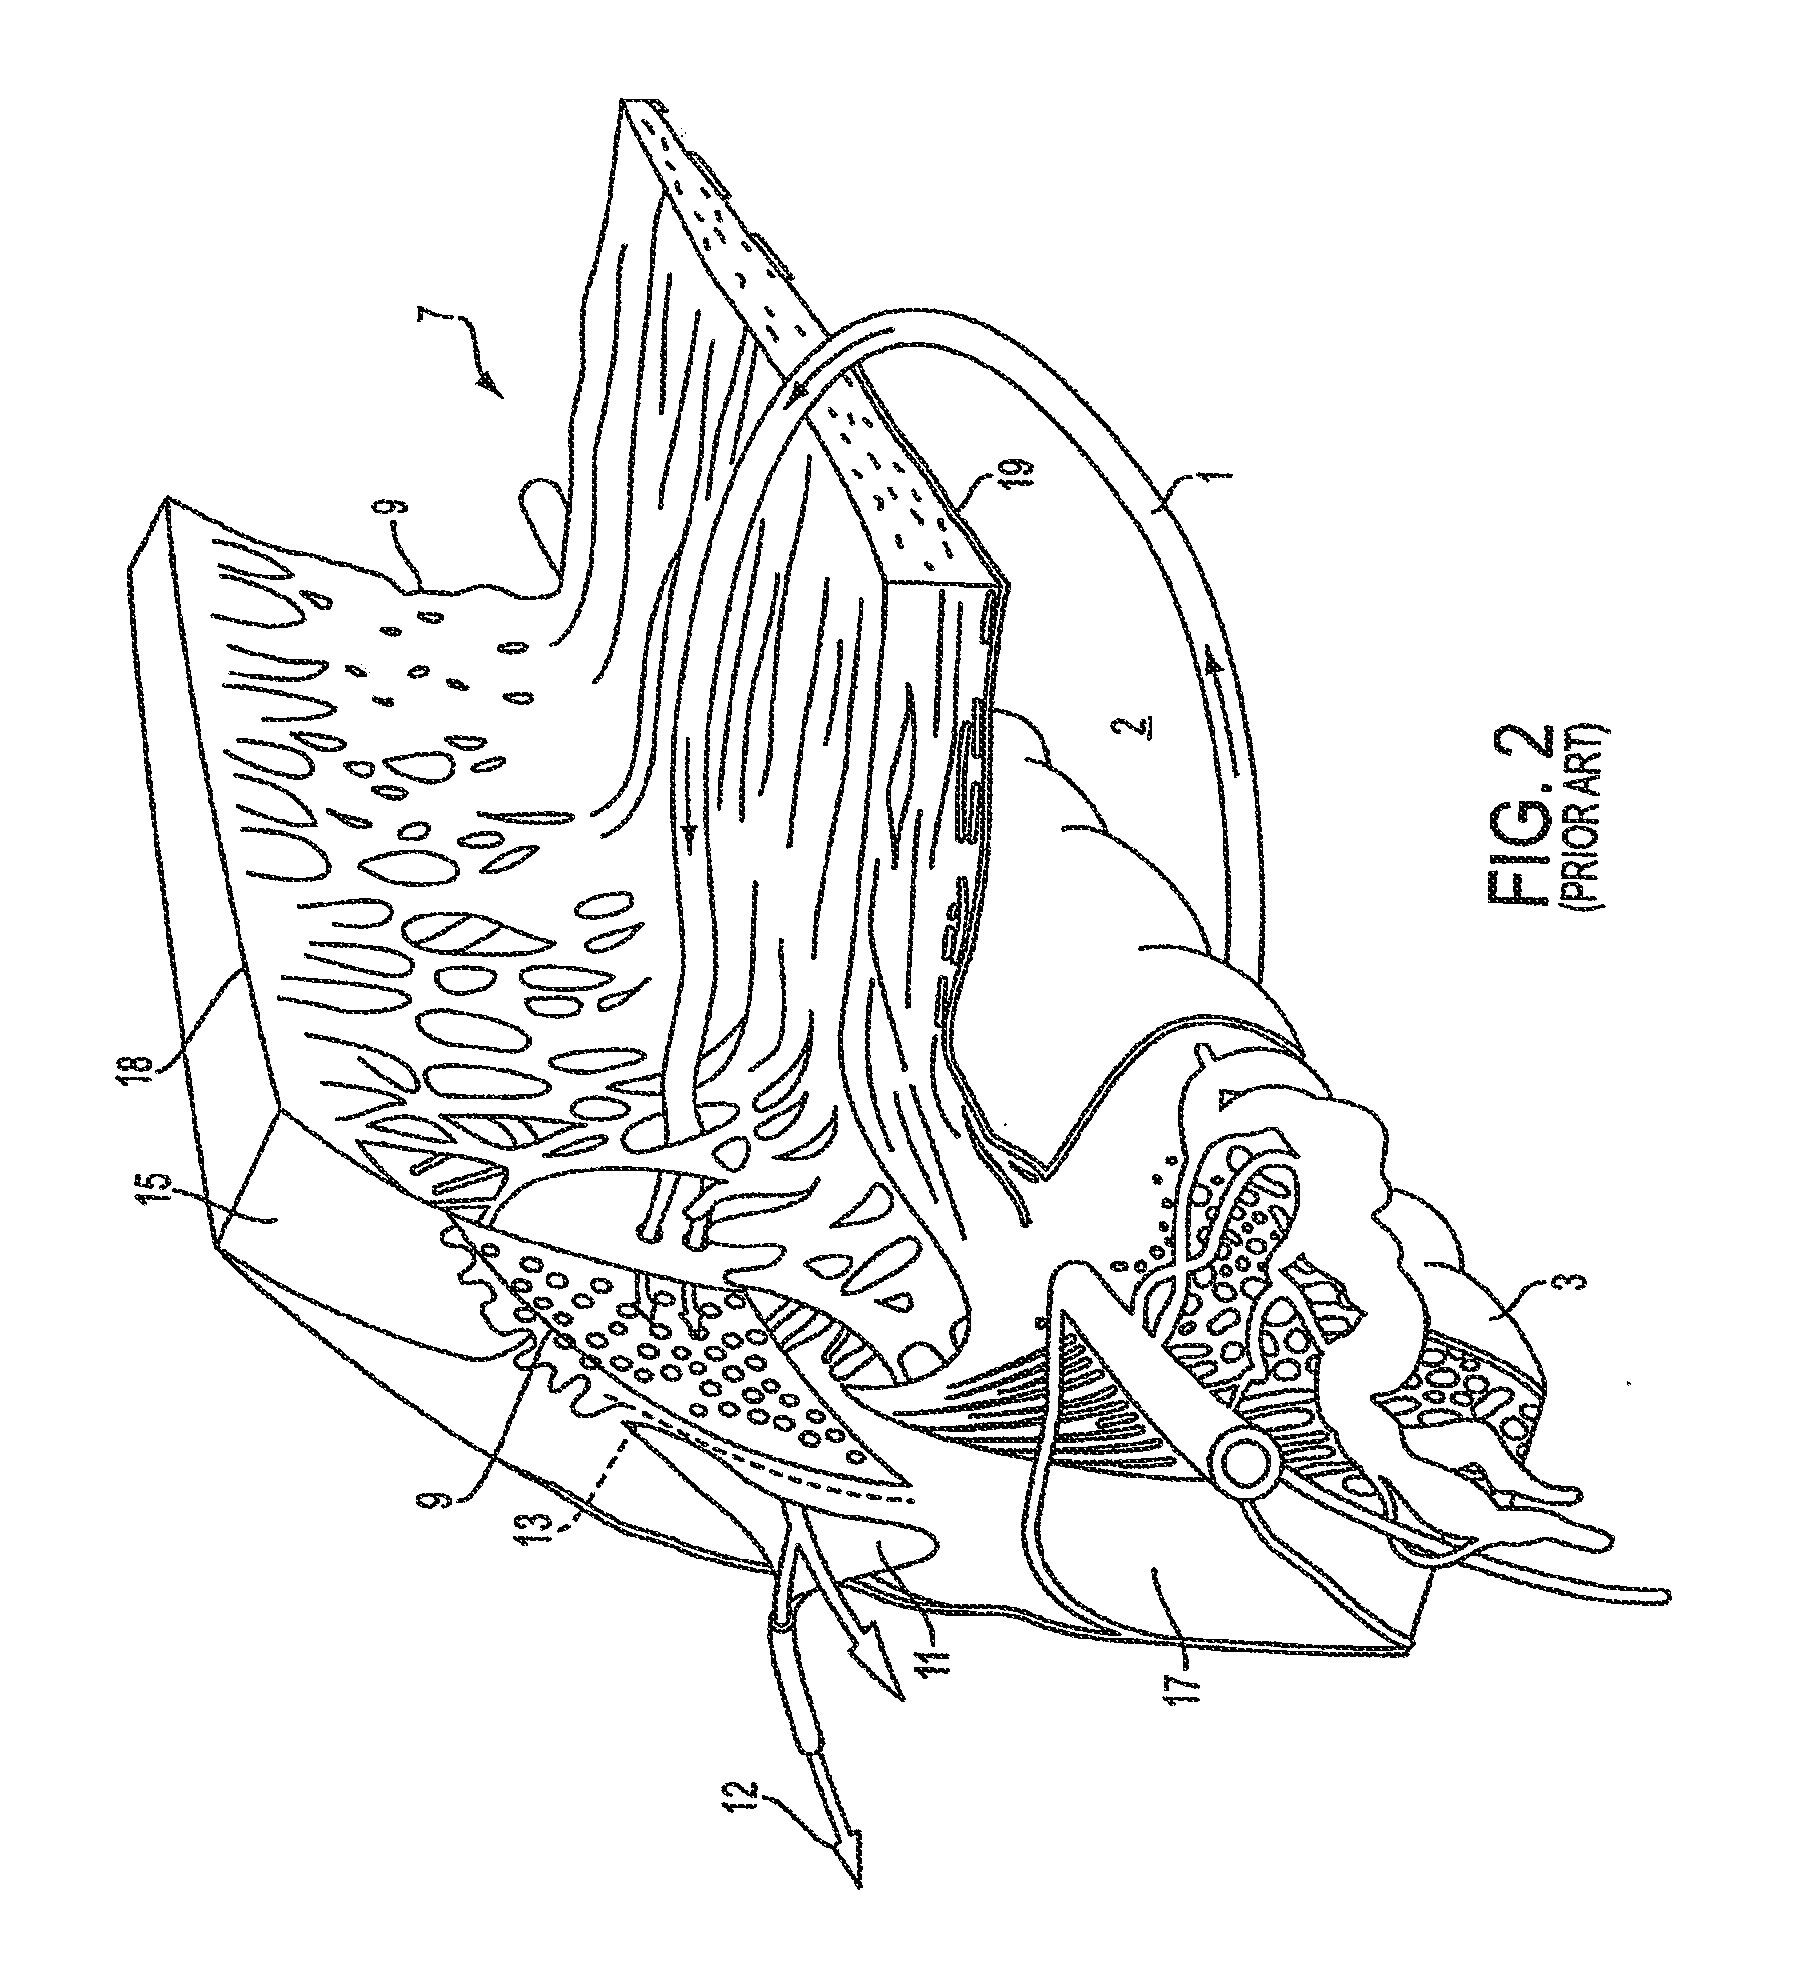 Delivery System and Method of Use for the Eye